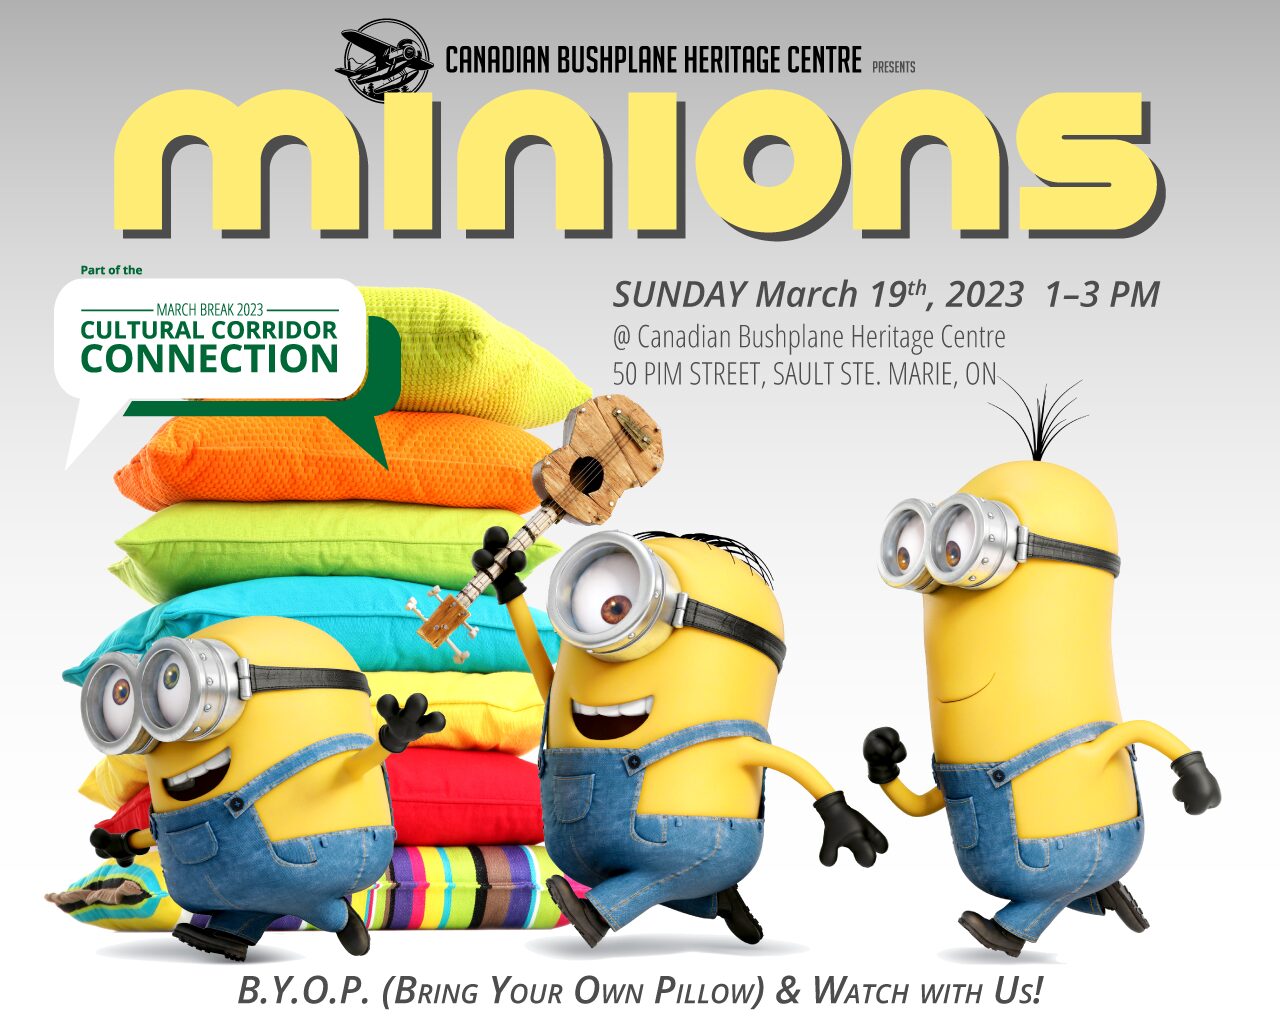 Promotional poster detailing the presentation of Illumination's Minions film at the Canadian Bushplane Heritage Centre